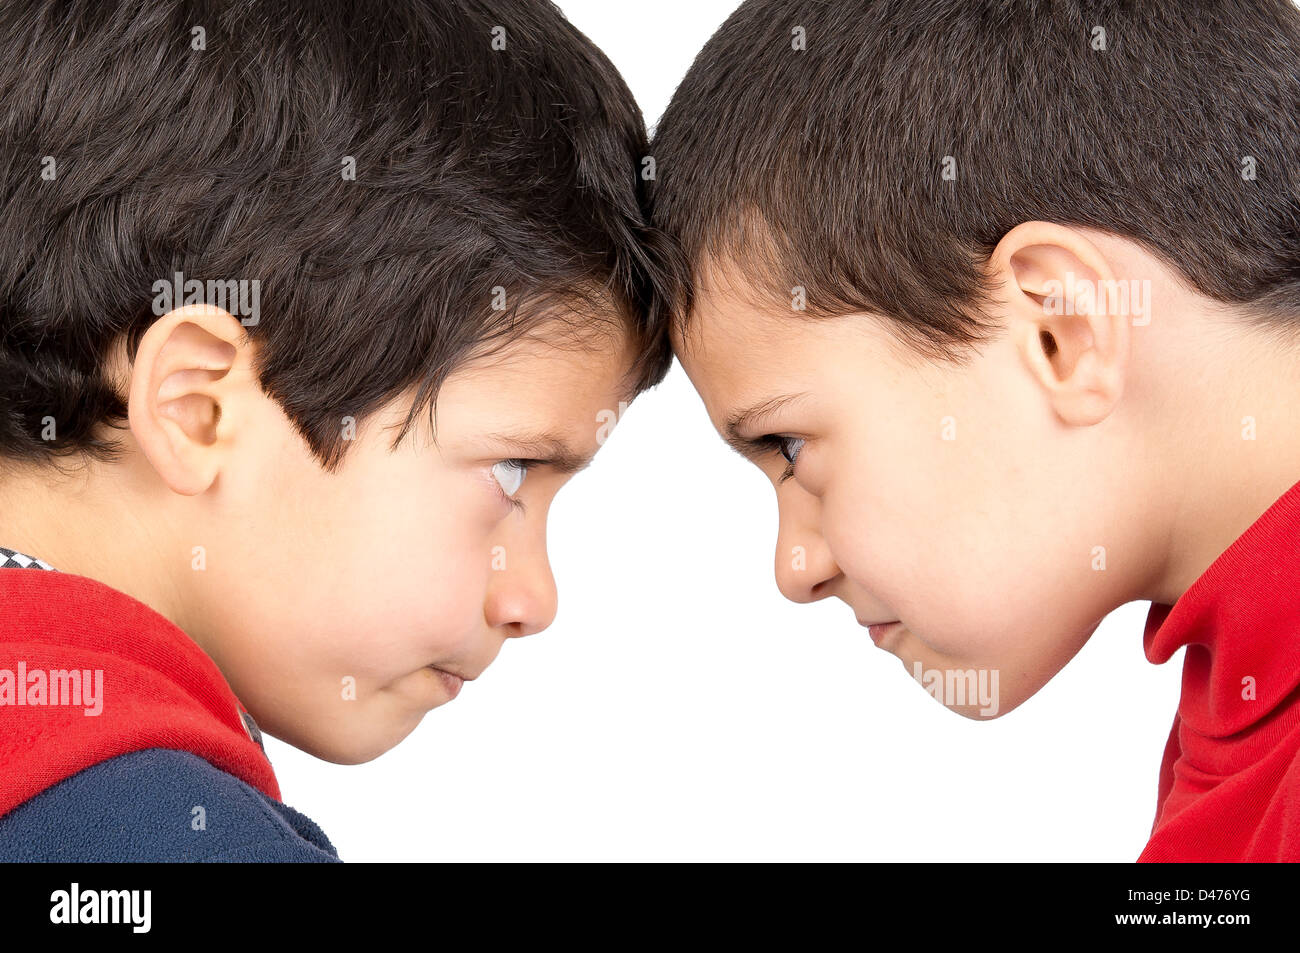 Two boys facing one another isolated in white Stock Photo